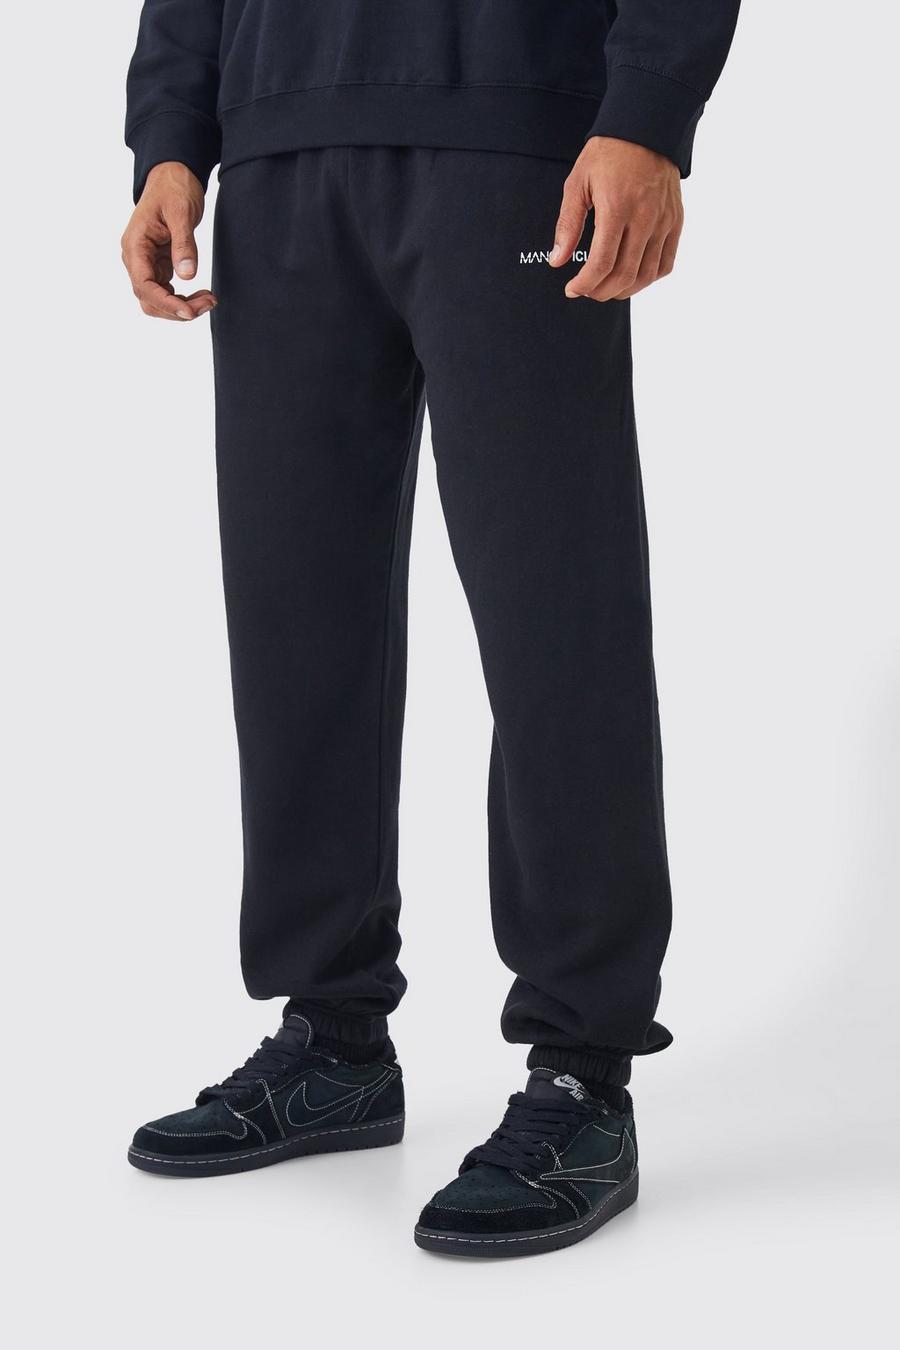 Black Man Official Oversized Joggers